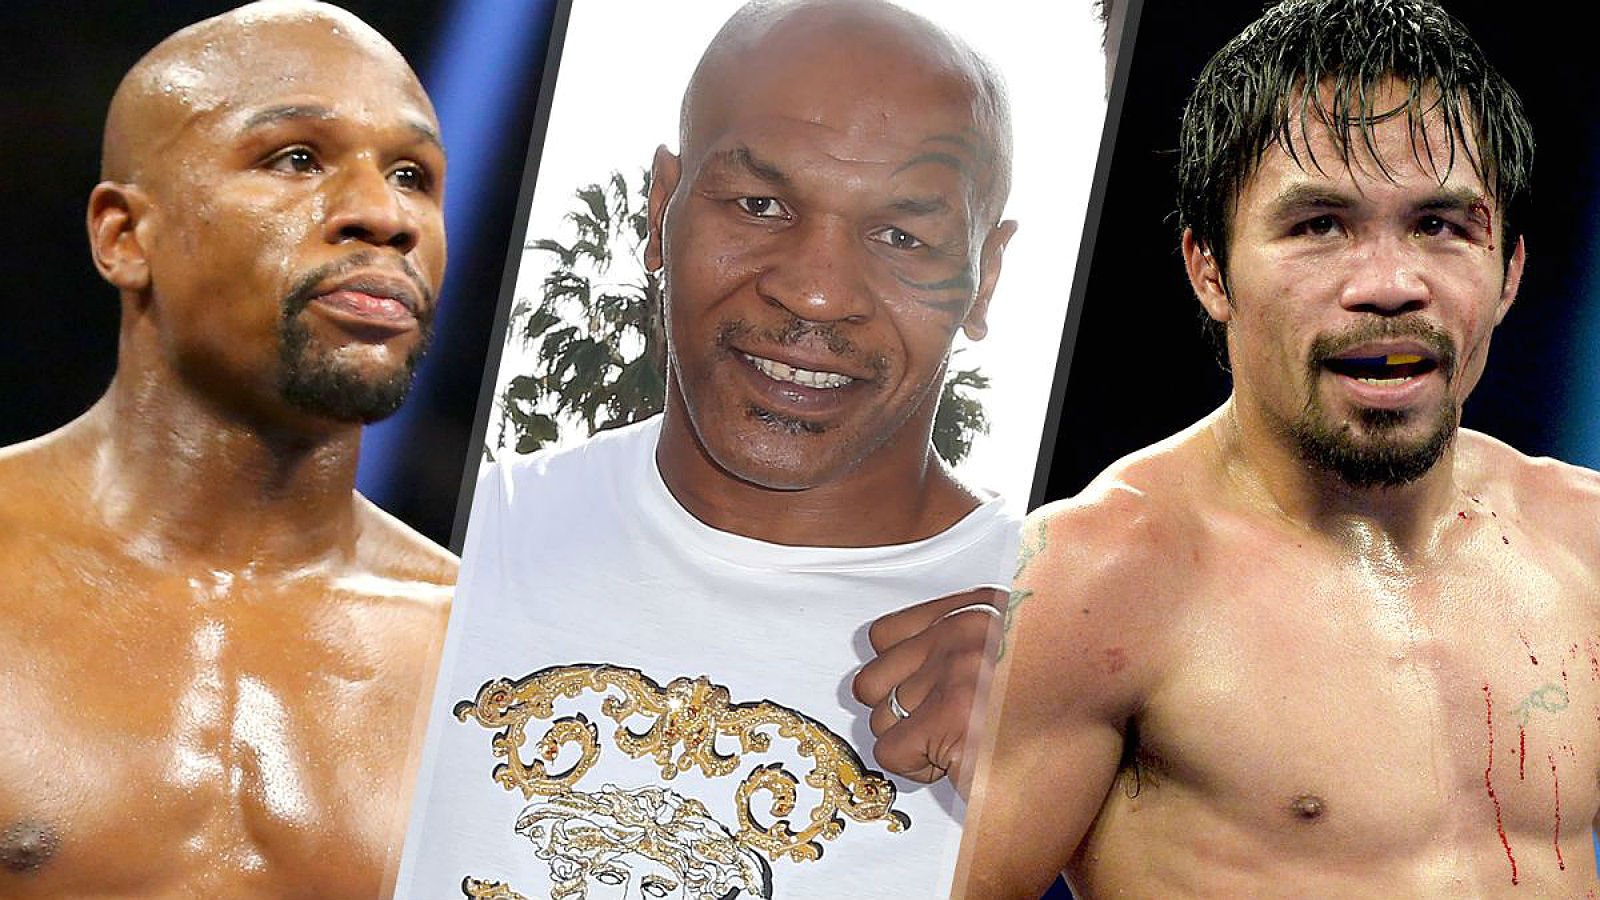 mayweather, Pacquiao, Boxing, Manny, Floyd, Fighting, Warrior, Mike, Tyson Wallpaper